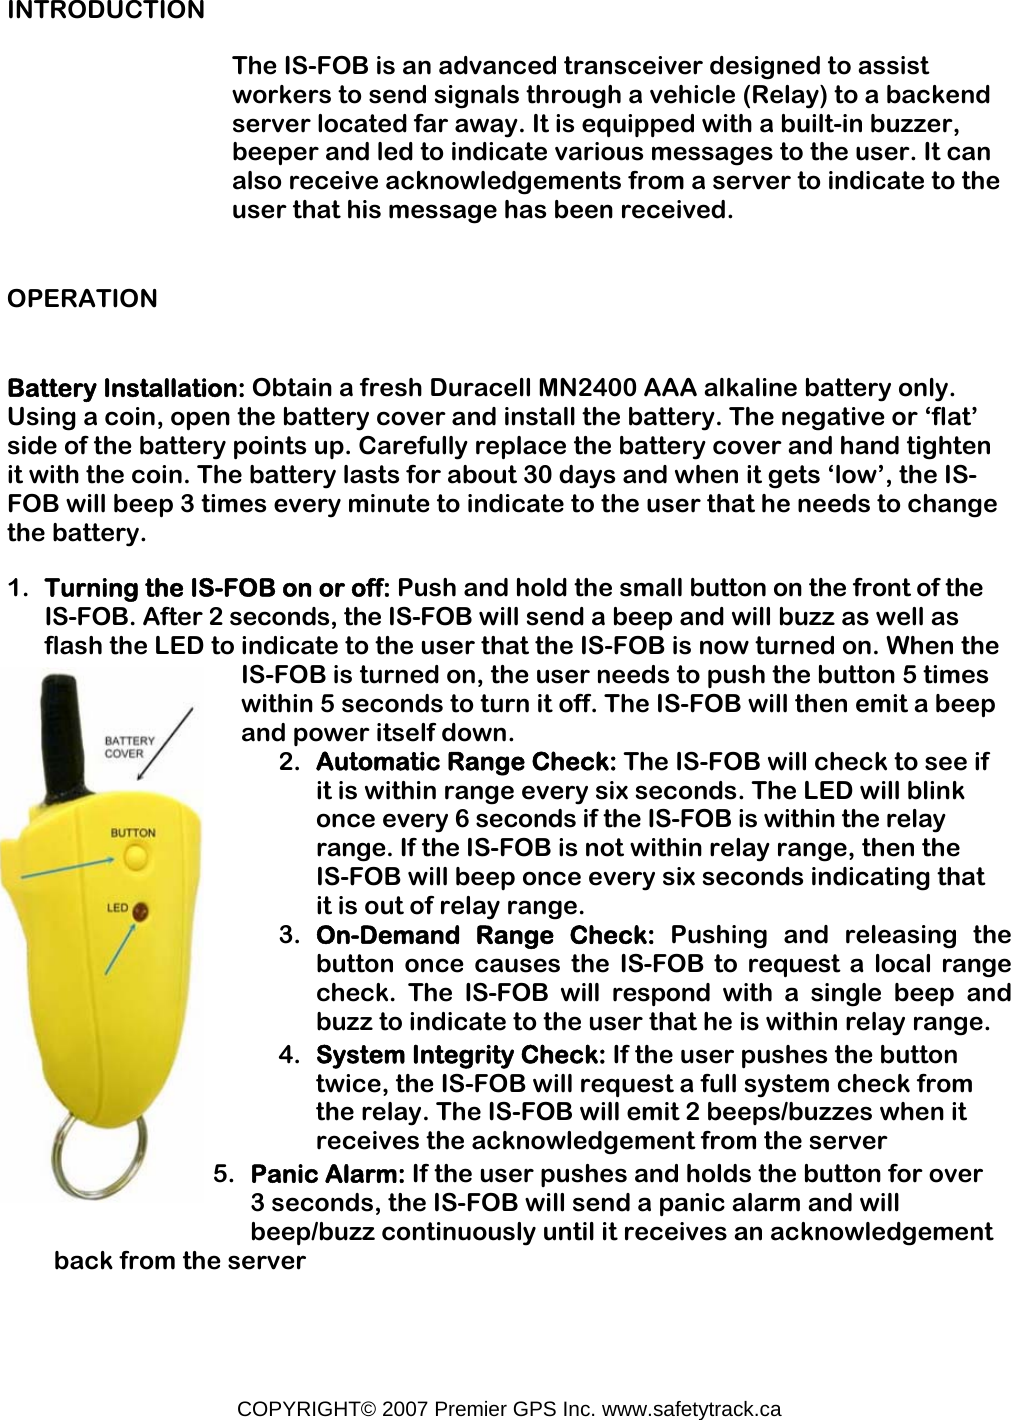 COPYRIGHT© 2007 Premier GPS Inc. www.safetytrack.ca INTRODUCTION The IS-FOB is an advanced transceiver designed to assist workers to send signals through a vehicle (Relay) to a backend server located far away. It is equipped with a built-in buzzer, beeper and led to indicate various messages to the user. It can also receive acknowledgements from a server to indicate to the user that his message has been received. OPERATION Battery Installation: Obtain a fresh Duracell MN2400 AAA alkaline battery only. Using a coin, open the battery cover and install the battery. The negative or ‘flat’ side of the battery points up. Carefully replace the battery cover and hand tighten it with the coin. The battery lasts for about 30 days and when it gets ‘low’, the IS-FOB will beep 3 times every minute to indicate to the user that he needs to change the battery. 1. Turning the IS-FOB on or off: Push and hold the small button on the front of the IS-FOB. After 2 seconds, the IS-FOB will send a beep and will buzz as well as flash the LED to indicate to the user that the IS-FOB is now turned on. When the IS-FOB is turned on, the user needs to push the button 5 times within 5 seconds to turn it off. The IS-FOB will then emit a beep and power itself down. 2. Automatic Range Check: The IS-FOB will check to see if it is within range every six seconds. The LED will blink once every 6 seconds if the IS-FOB is within the relay range. If the IS-FOB is not within relay range, then the IS-FOB will beep once every six seconds indicating that it is out of relay range. 3. On-Demand Range Check: Pushing and releasing the button once causes the IS-FOB to request a local range check. The IS-FOB will respond with a single beep and buzz to indicate to the user that he is within relay range. 4. System Integrity Check: If the user pushes the button twice, the IS-FOB will request a full system check from the relay. The IS-FOB will emit 2 beeps/buzzes when it receives the acknowledgement from the server 5. Panic Alarm: If the user pushes and holds the button for over 3 seconds, the IS-FOB will send a panic alarm and will beep/buzz continuously until it receives an acknowledgement back from the server  